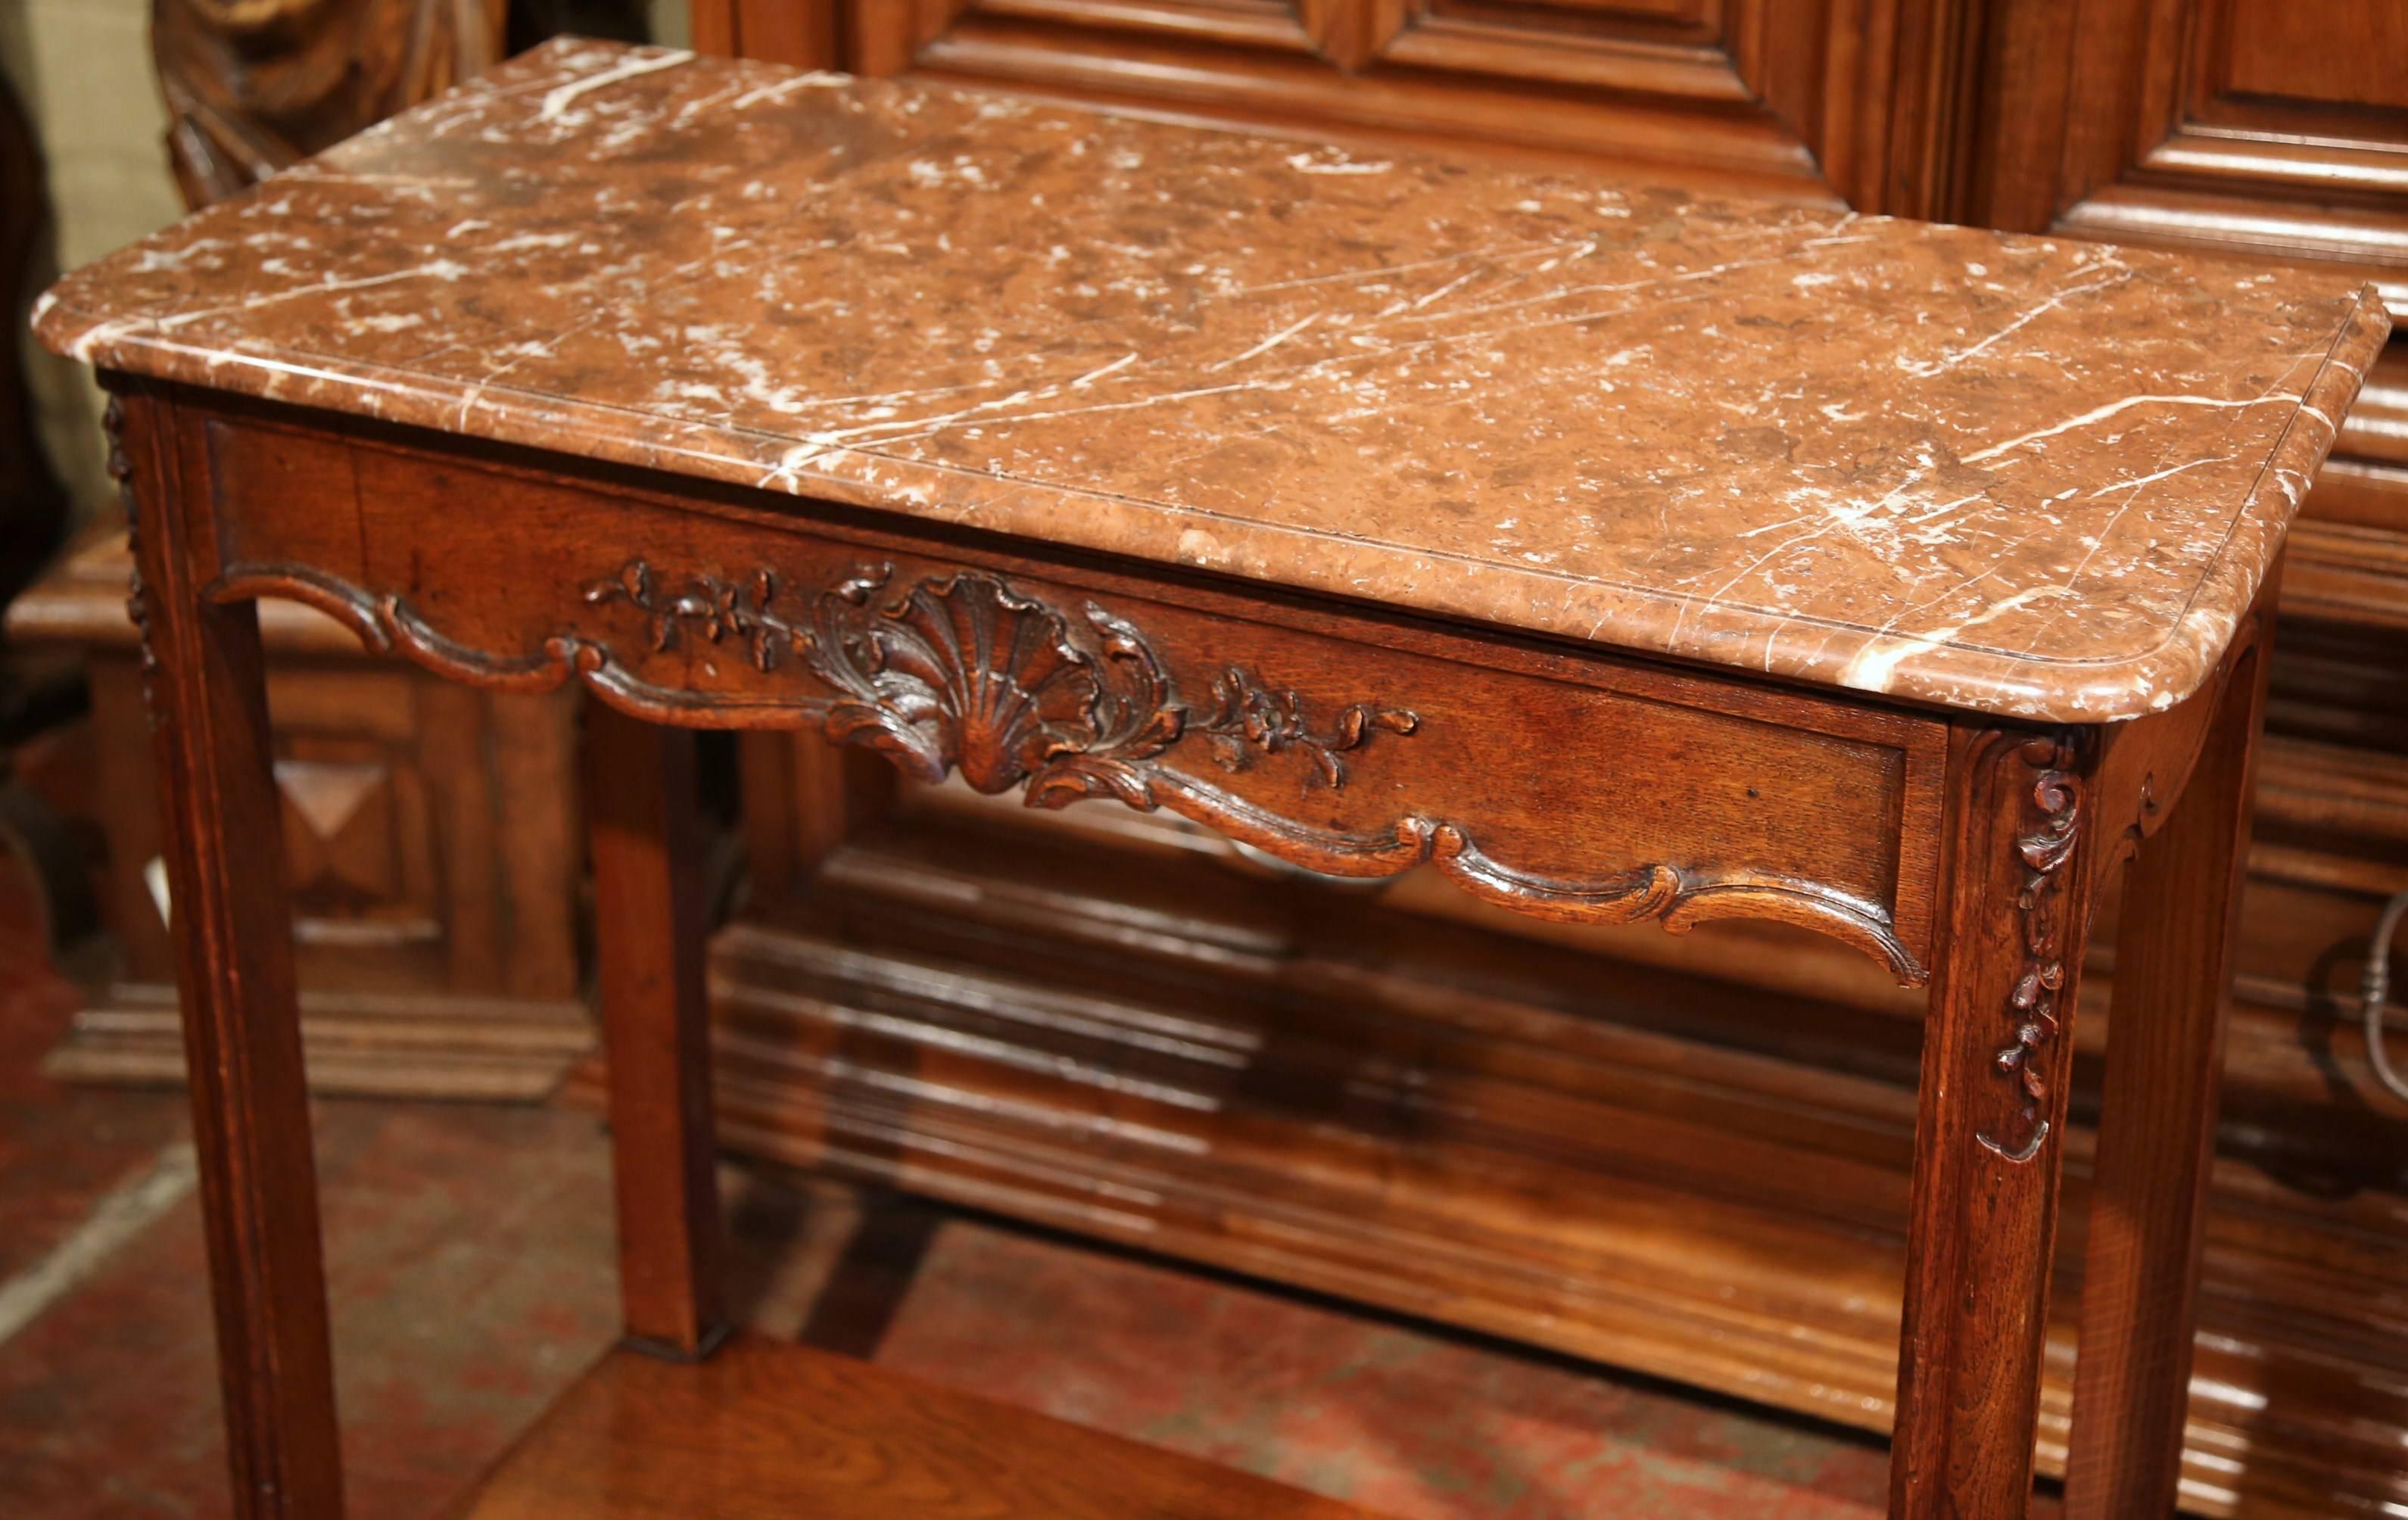 This elegant, antique console was crafted in Normandy, France, circa 1890. The tall, four-leg side table has a beautiful red marble top and a long single drawer across the front decorated with a carved shell. Underneath there's a bottom shelf for